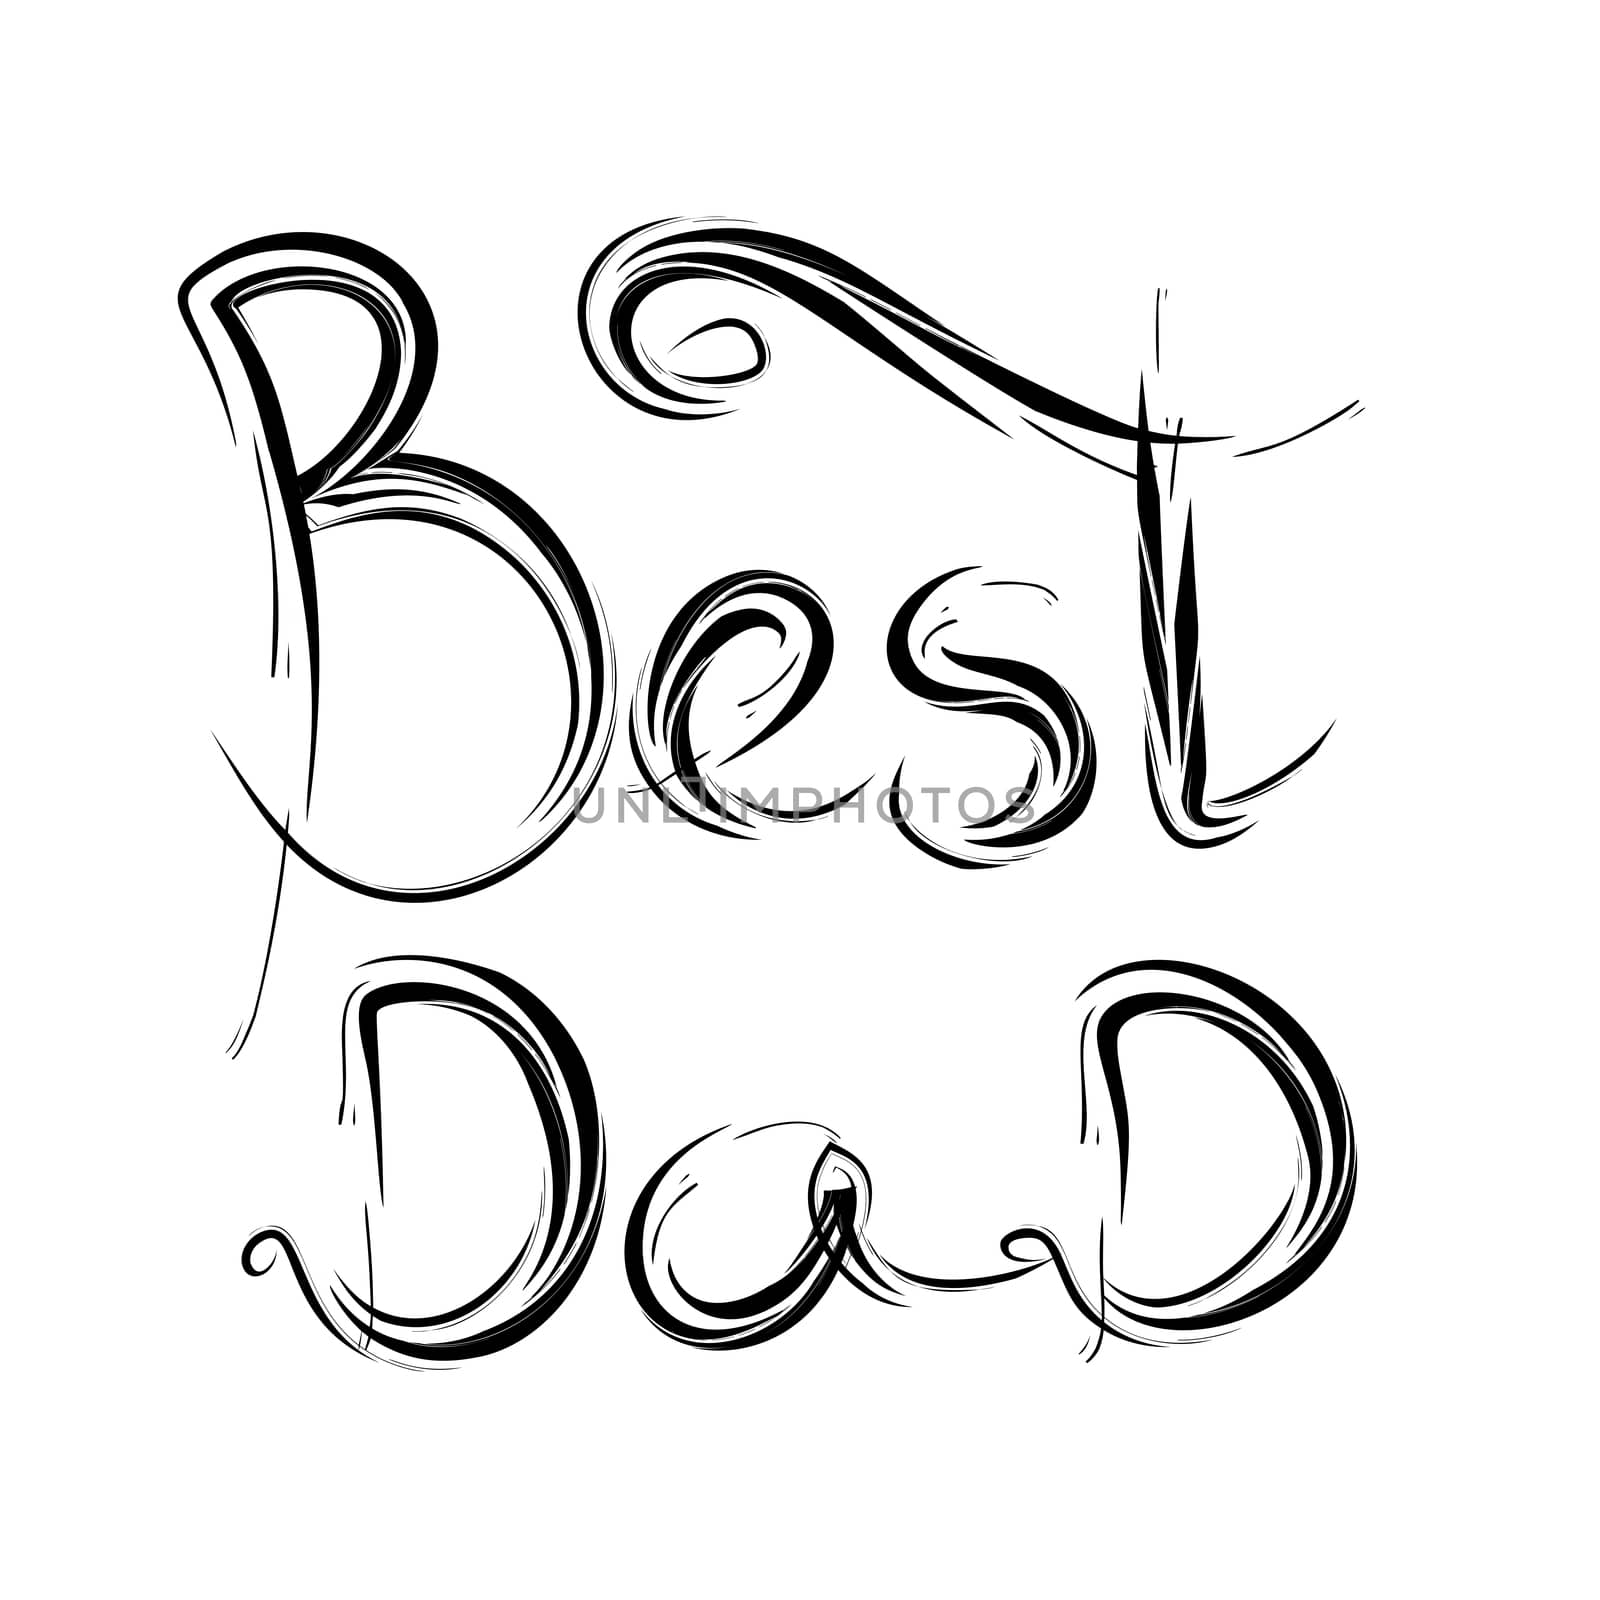 Best Dad. hand-written lettering, t-shirt print design, typographic composition isolated on white background. by skrotov